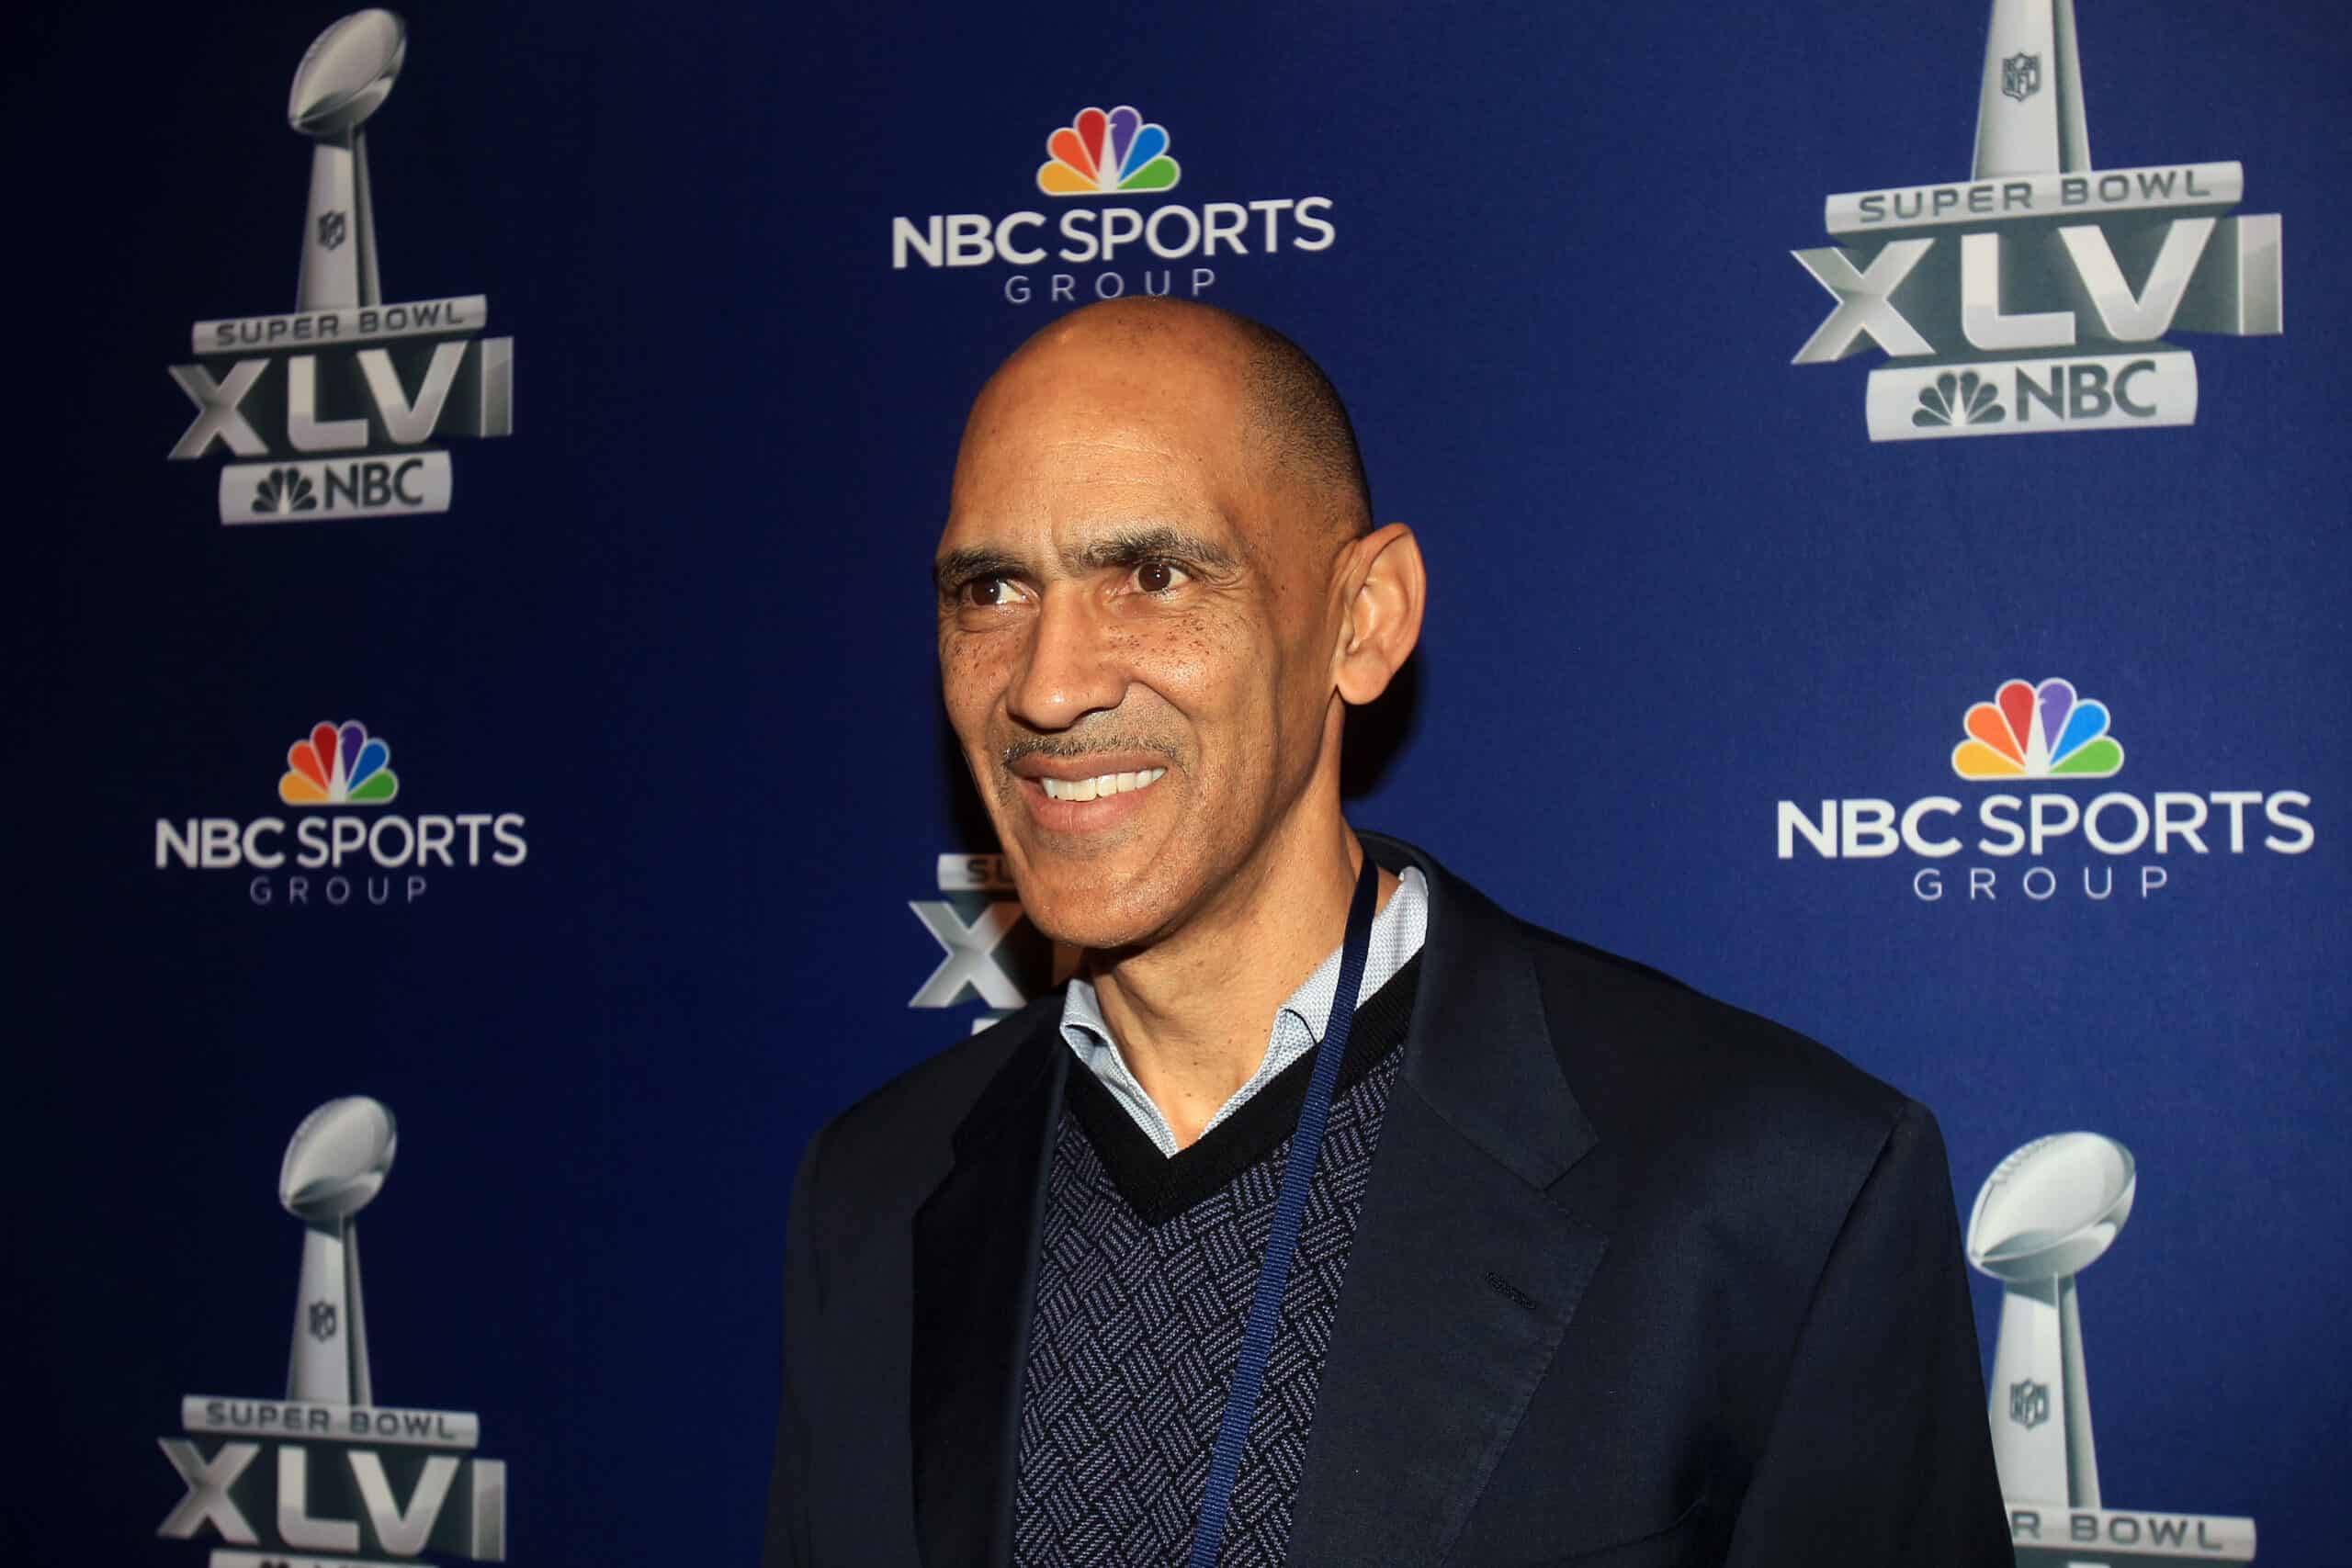 NBC studio analyst Tony Dungy looks on during the Super Bowl XLVI Broadcasters Press Conference at the Super Bowl XLVI Media Canter in the J.W. Marriott Indianapolis on January 31, 2012 in Indianapolis, Indiana. 